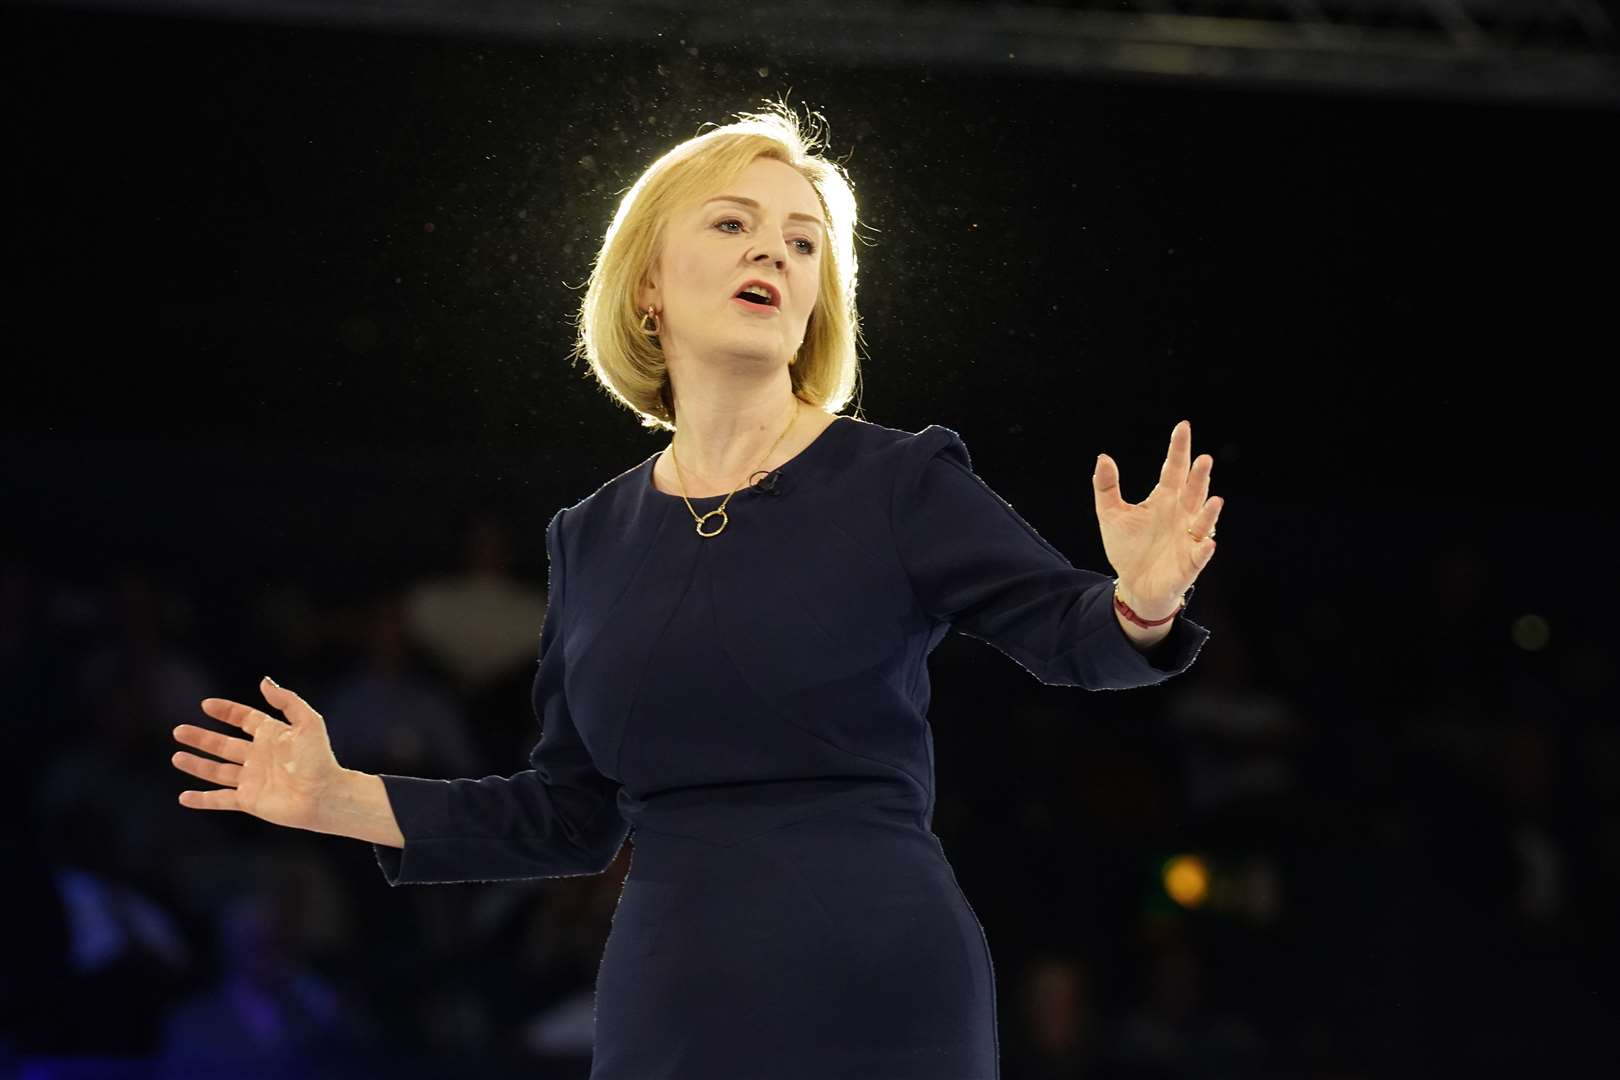 Liz Truss during the hustings event at Wembley Arena (Stefan Rousseau/PA)